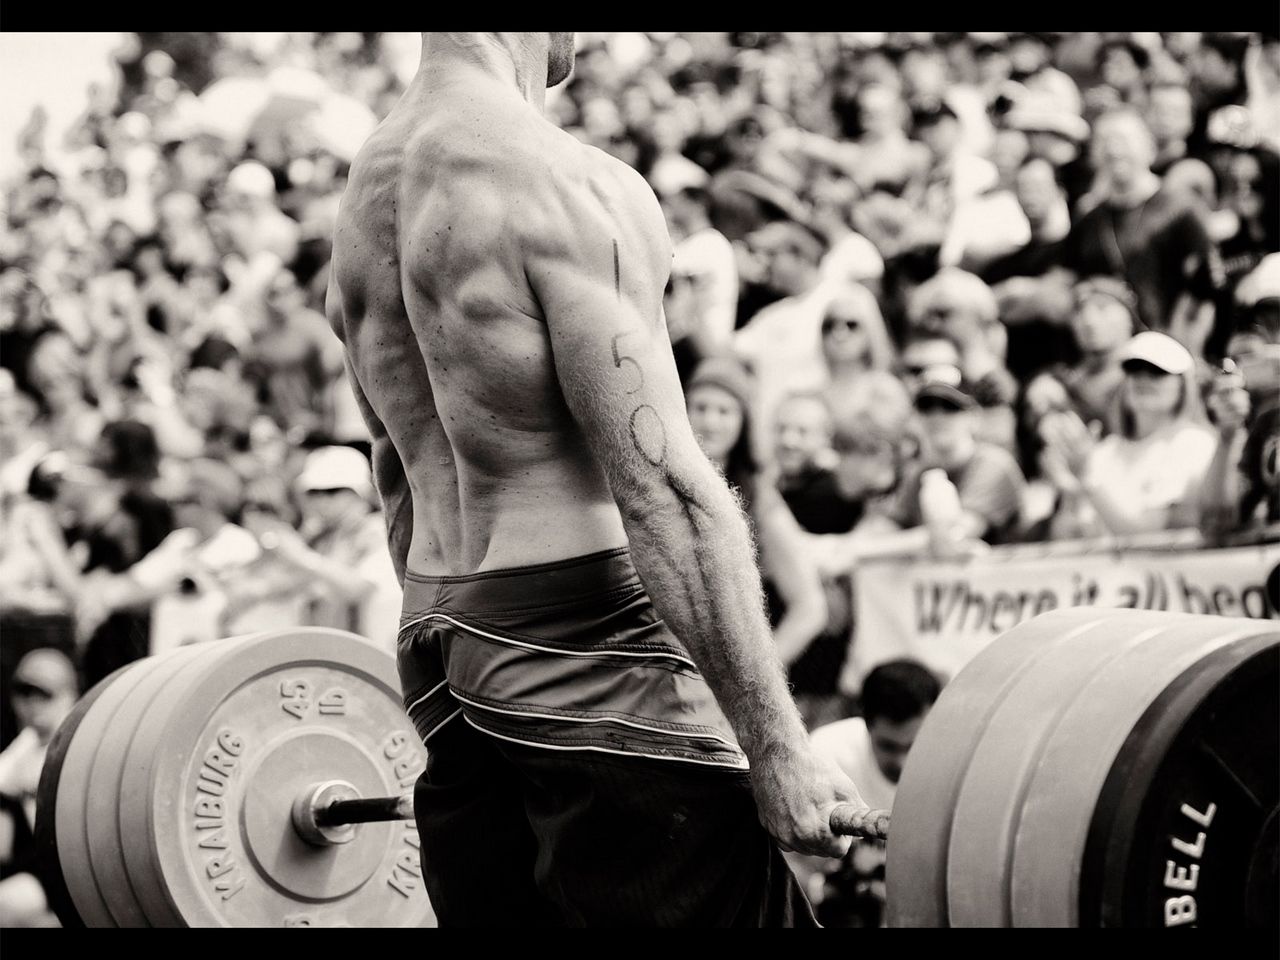 Download wallpaper 1280x960 weightlifting, back, sportsman, weight